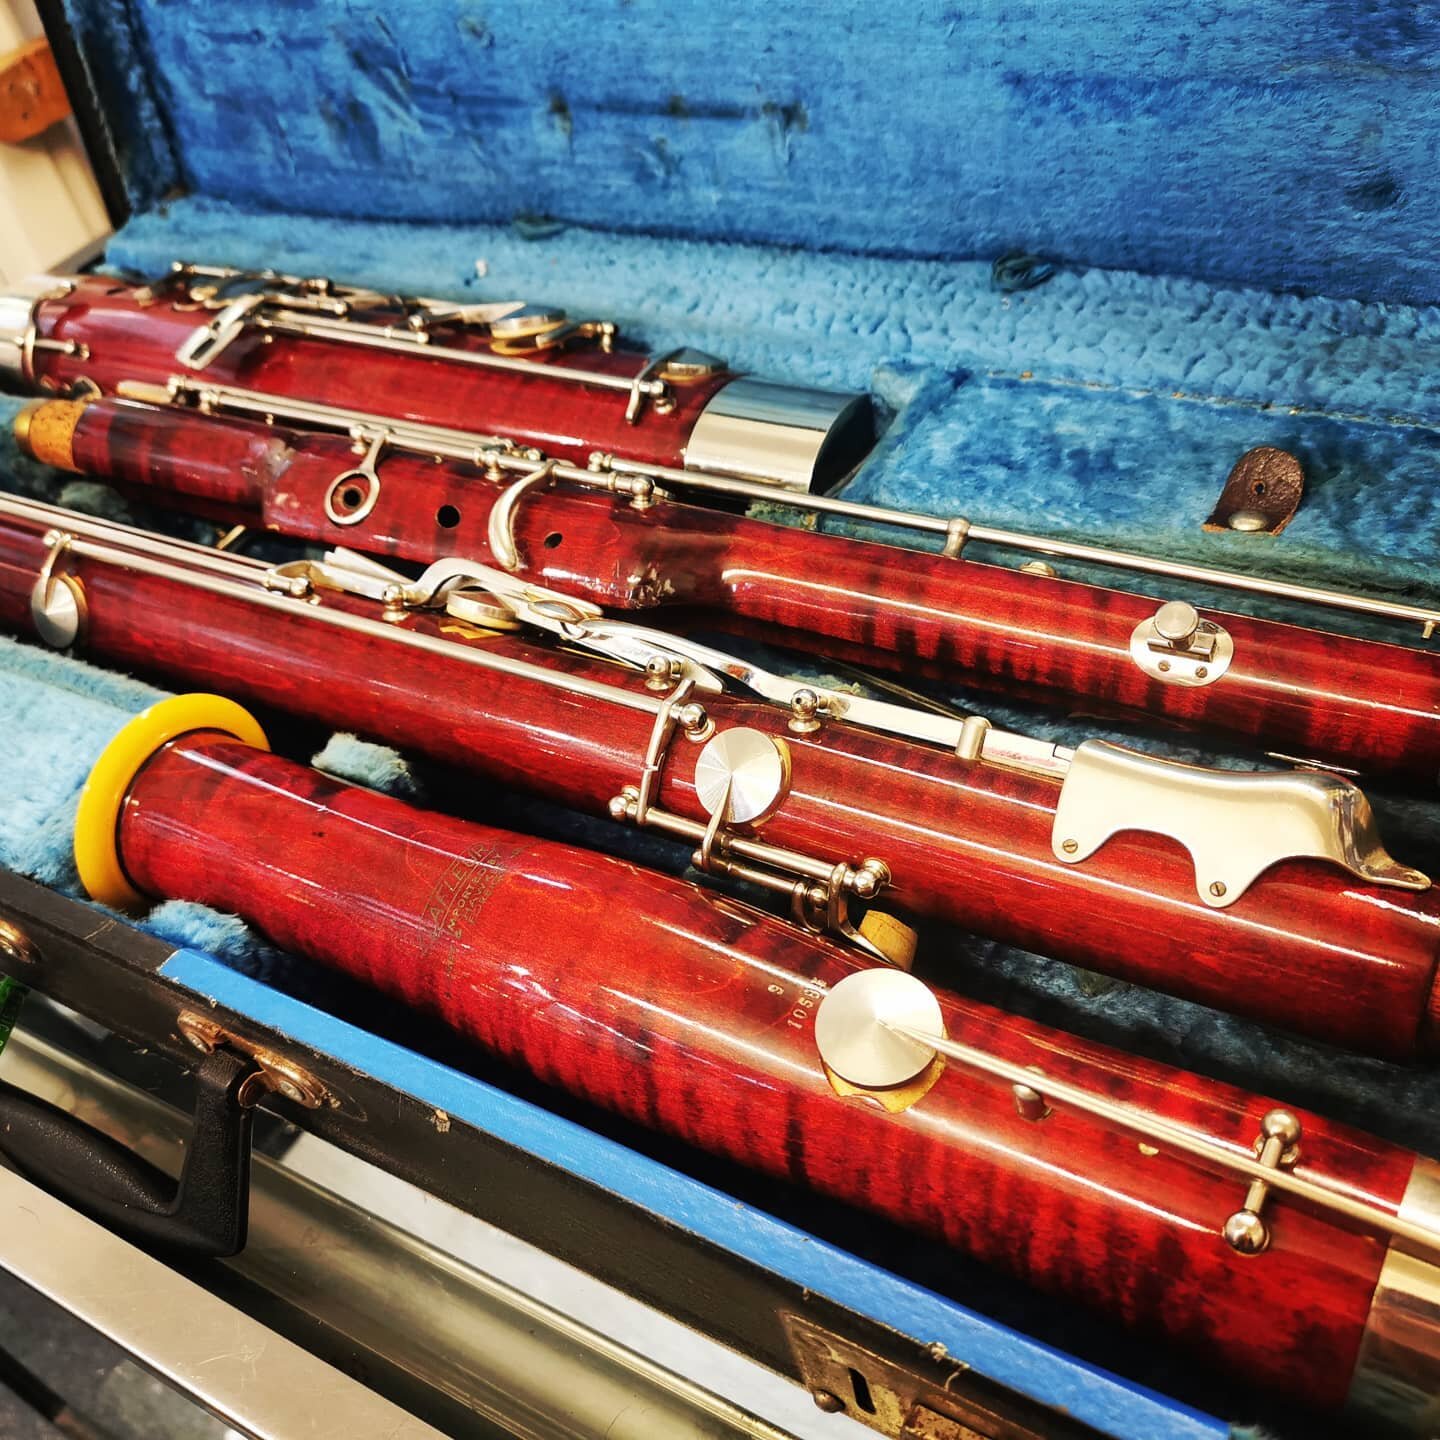 This Lafleur Bassoon is in full working order and is currently for sale from our workshop. Pop in to have a look, or ring up to arrange a test play on 0117 929 7217

#bassoon #lafleur #forsale #testplay #woodwind #woodwindrepair #instrumentrepair #in